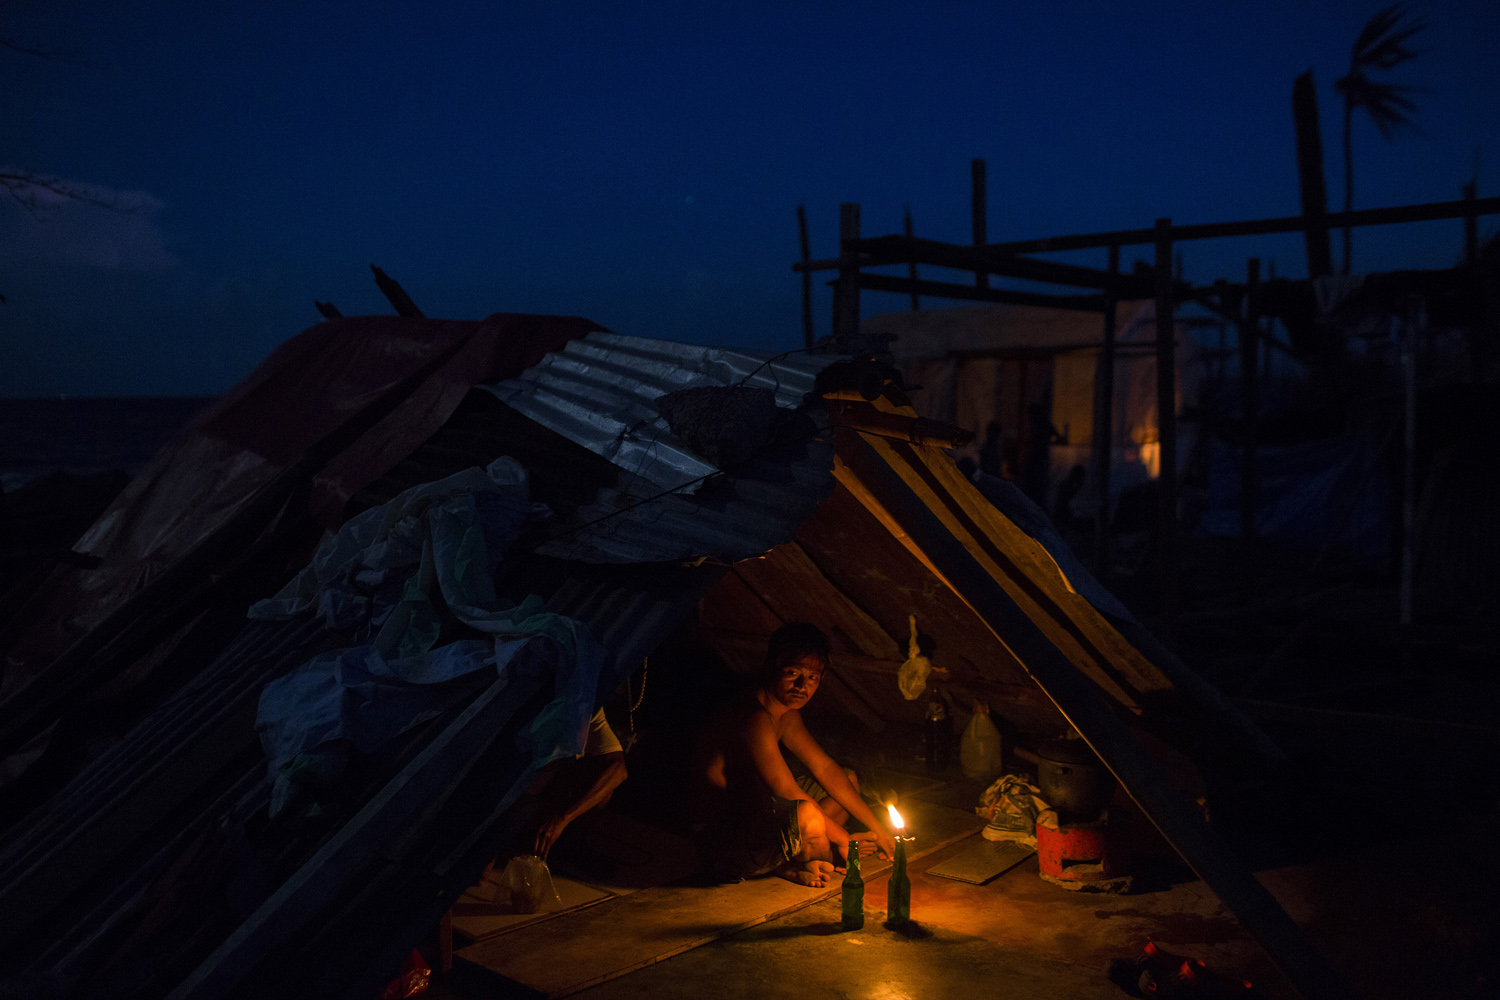 A man who's home was destroyed by Haiyan Typhoon sits by a candle light in the rubble of his home in Tanuan, The Philippines on November 15, 2013.